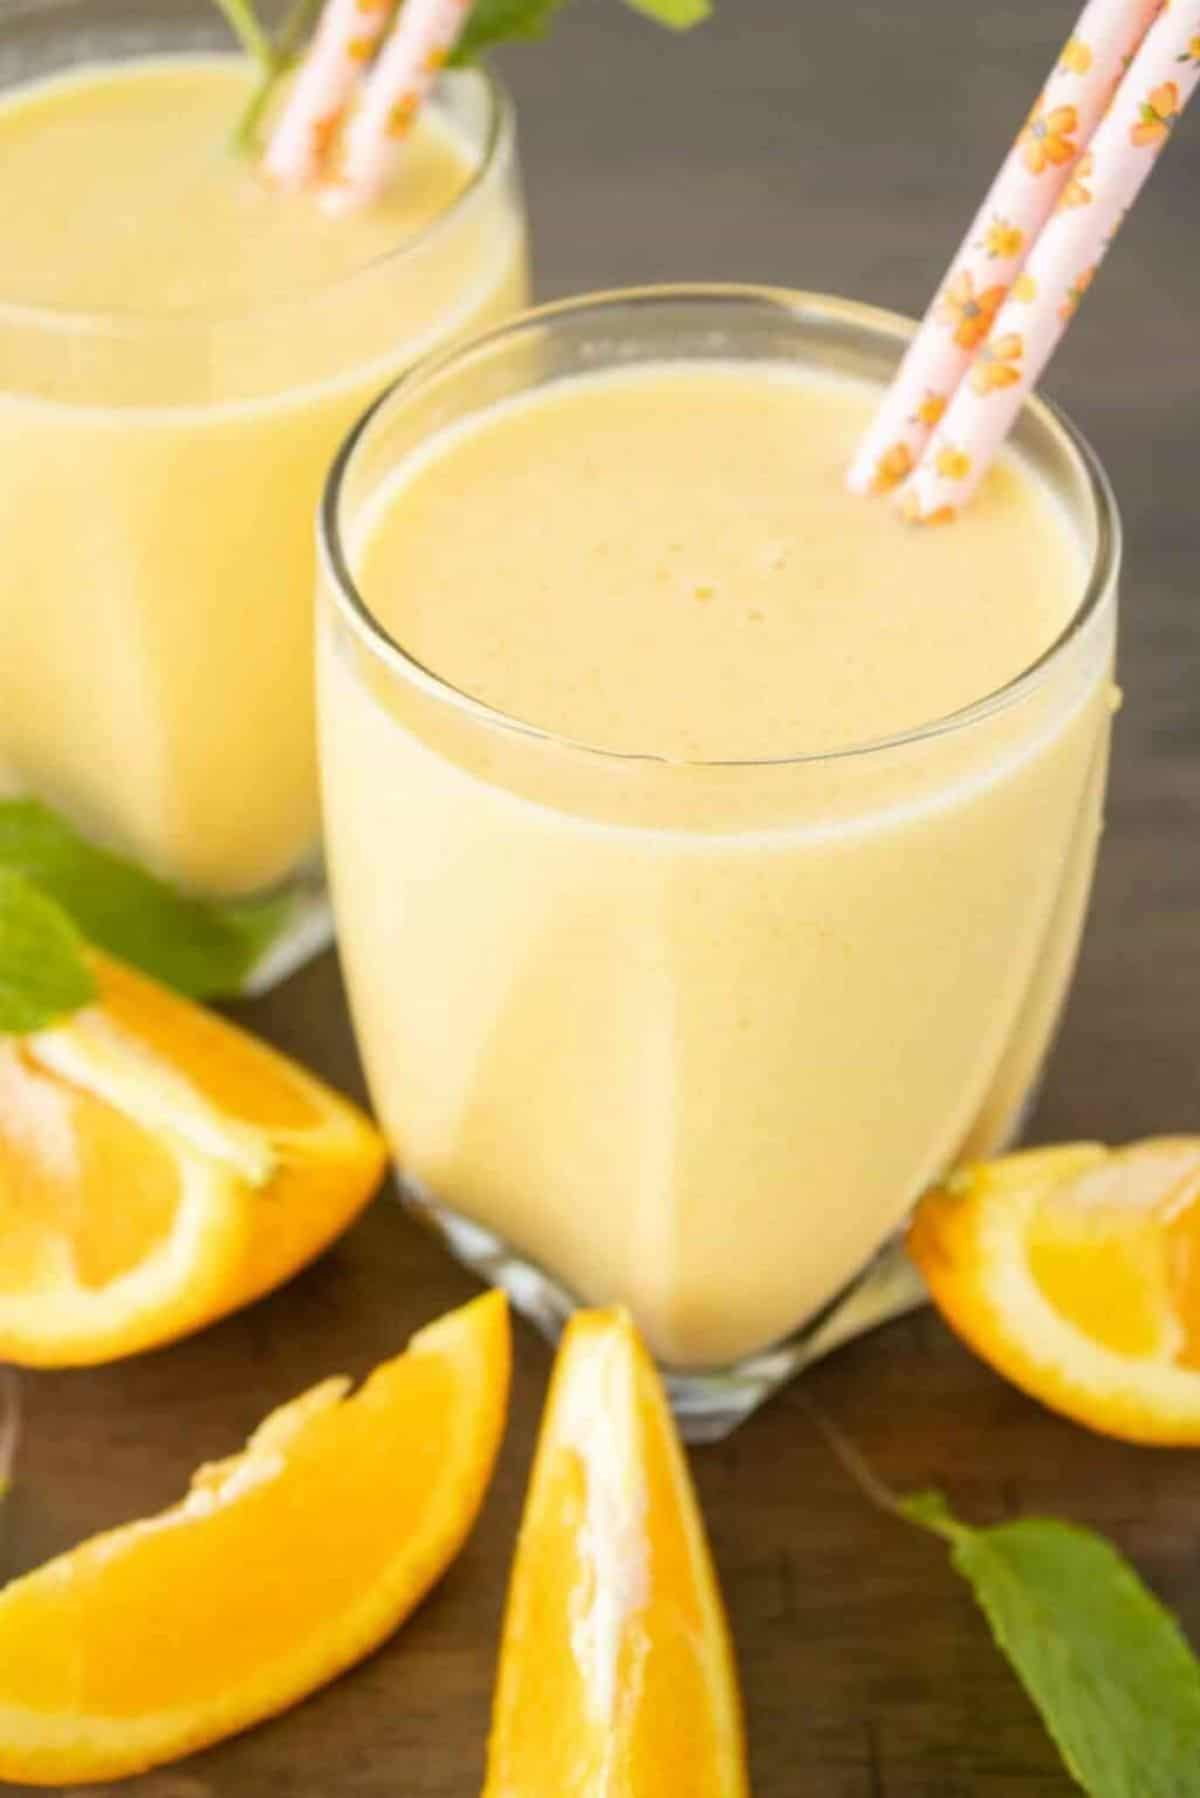 Orange Julius drink in a glass with two straws.